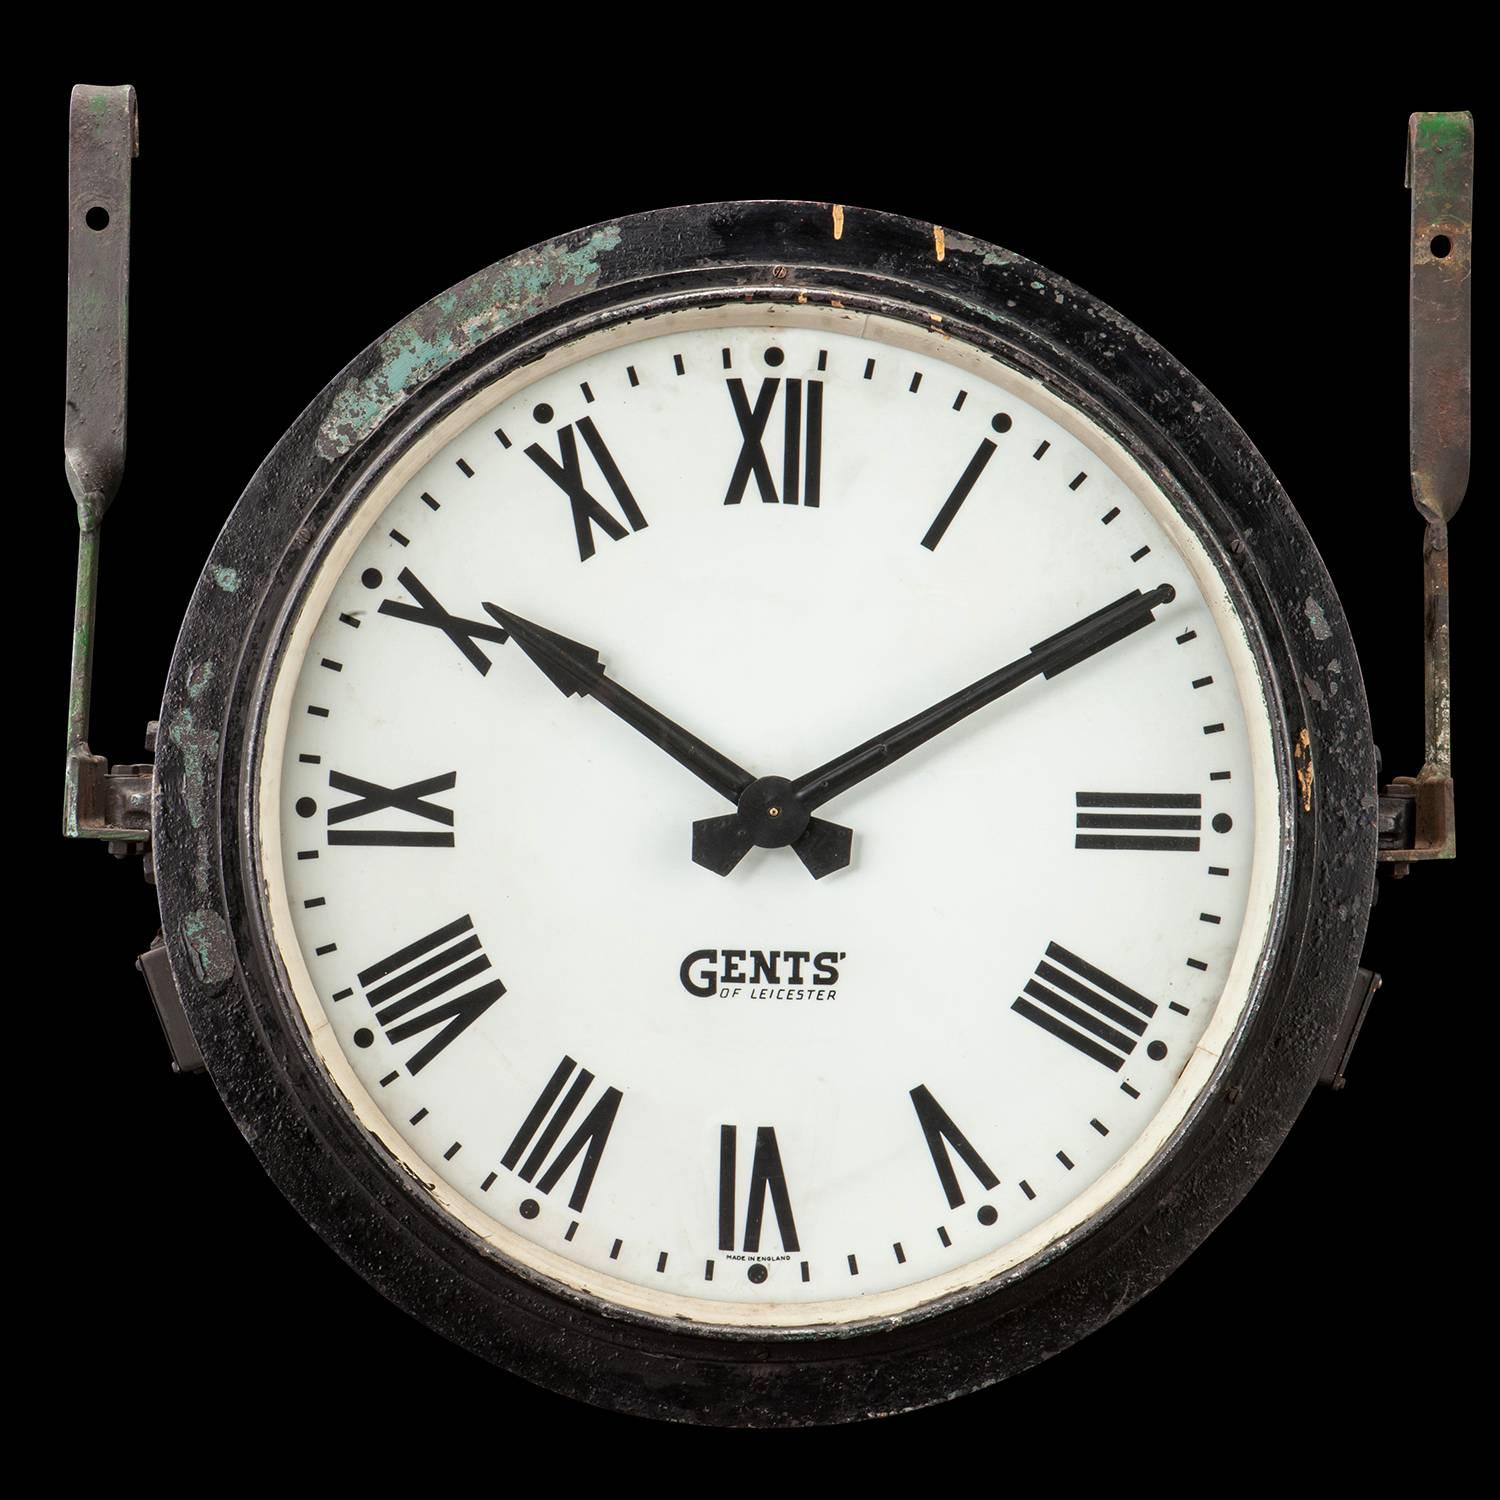 A large steel case with opaline glass twin faced illuminated station clock.